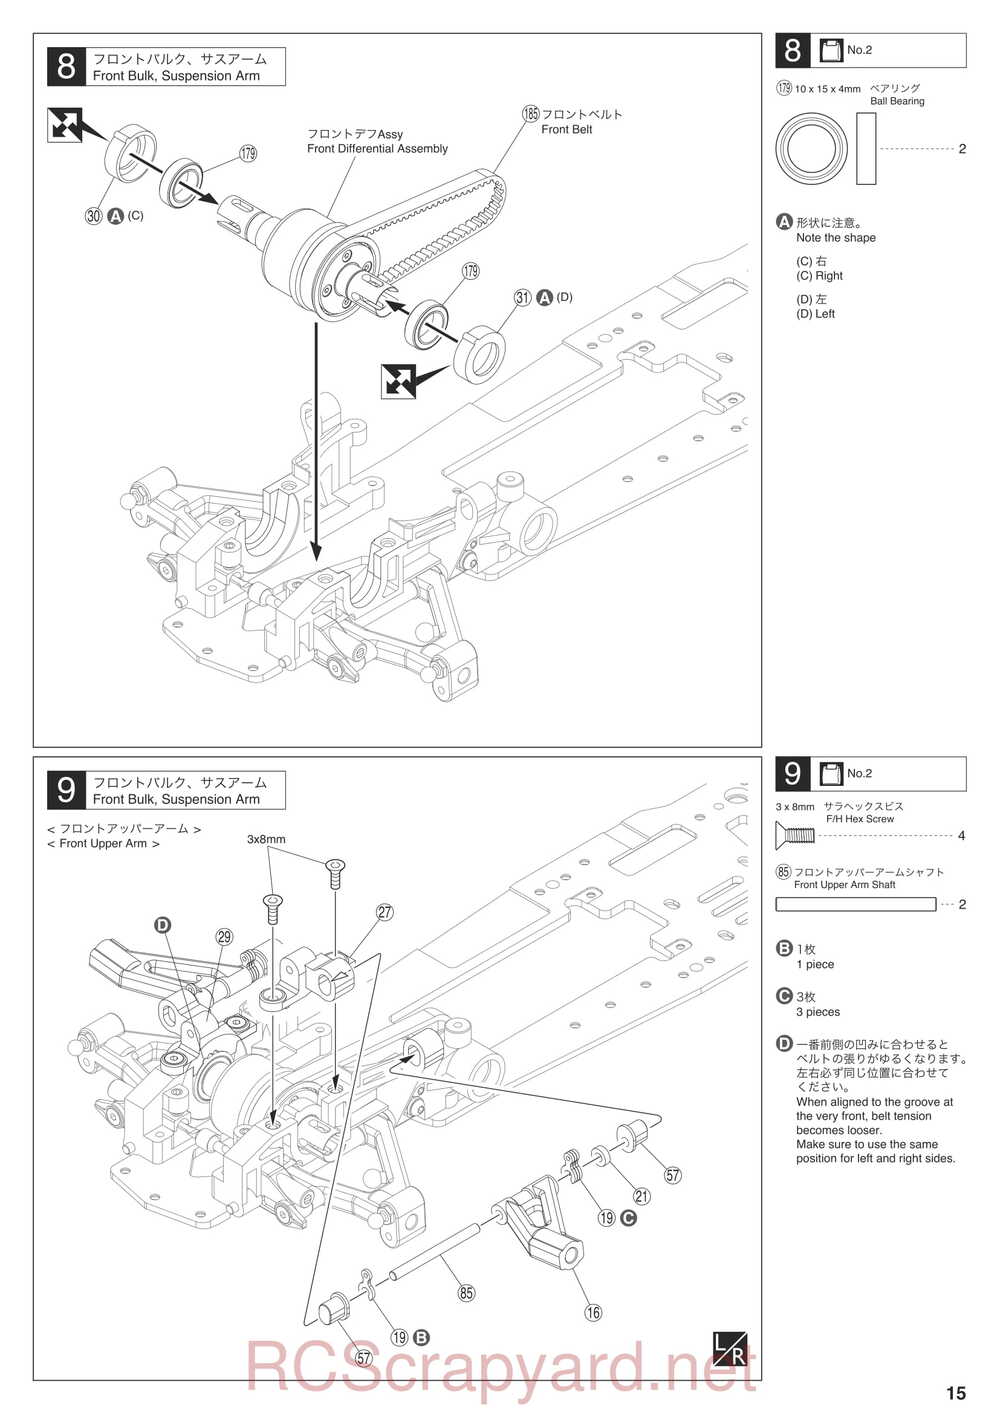 Kyosho - 31265 - V-ONE-R4 - Manual - Page 15